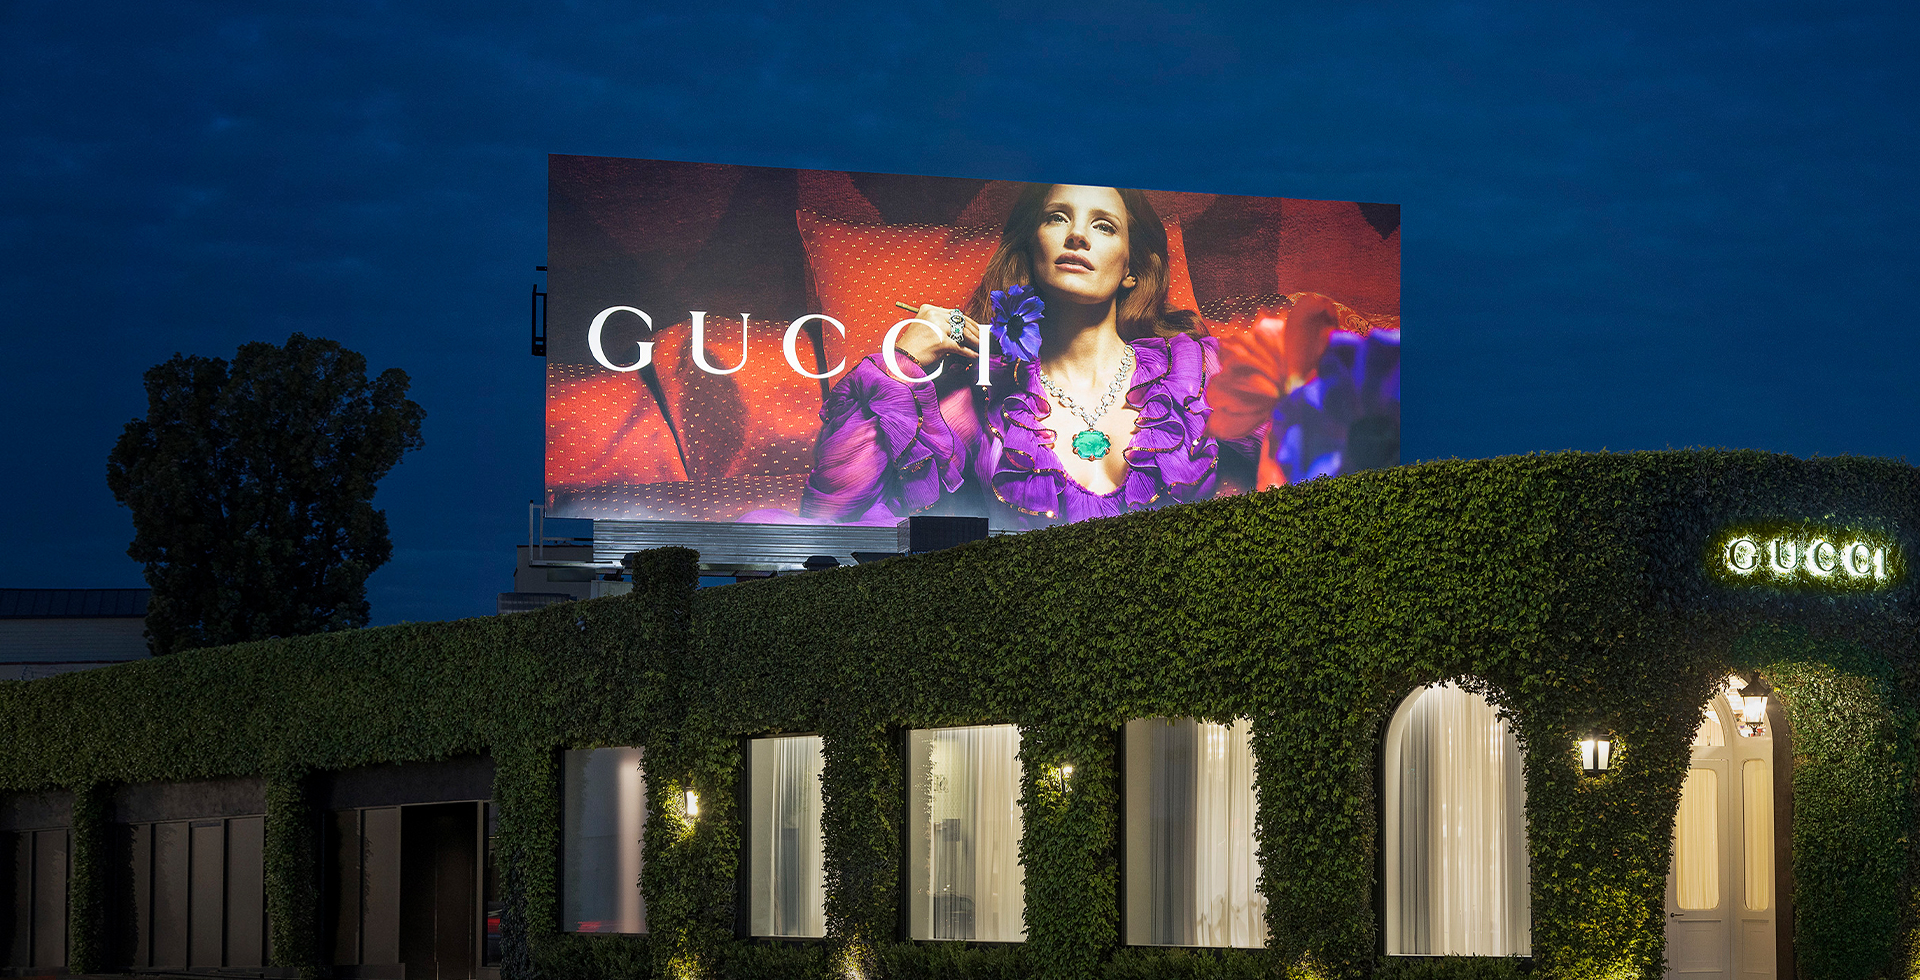 GUCCI'S BY-APPOINTMENT-ONLY SALON DEBUTS IN L.A. The house's first